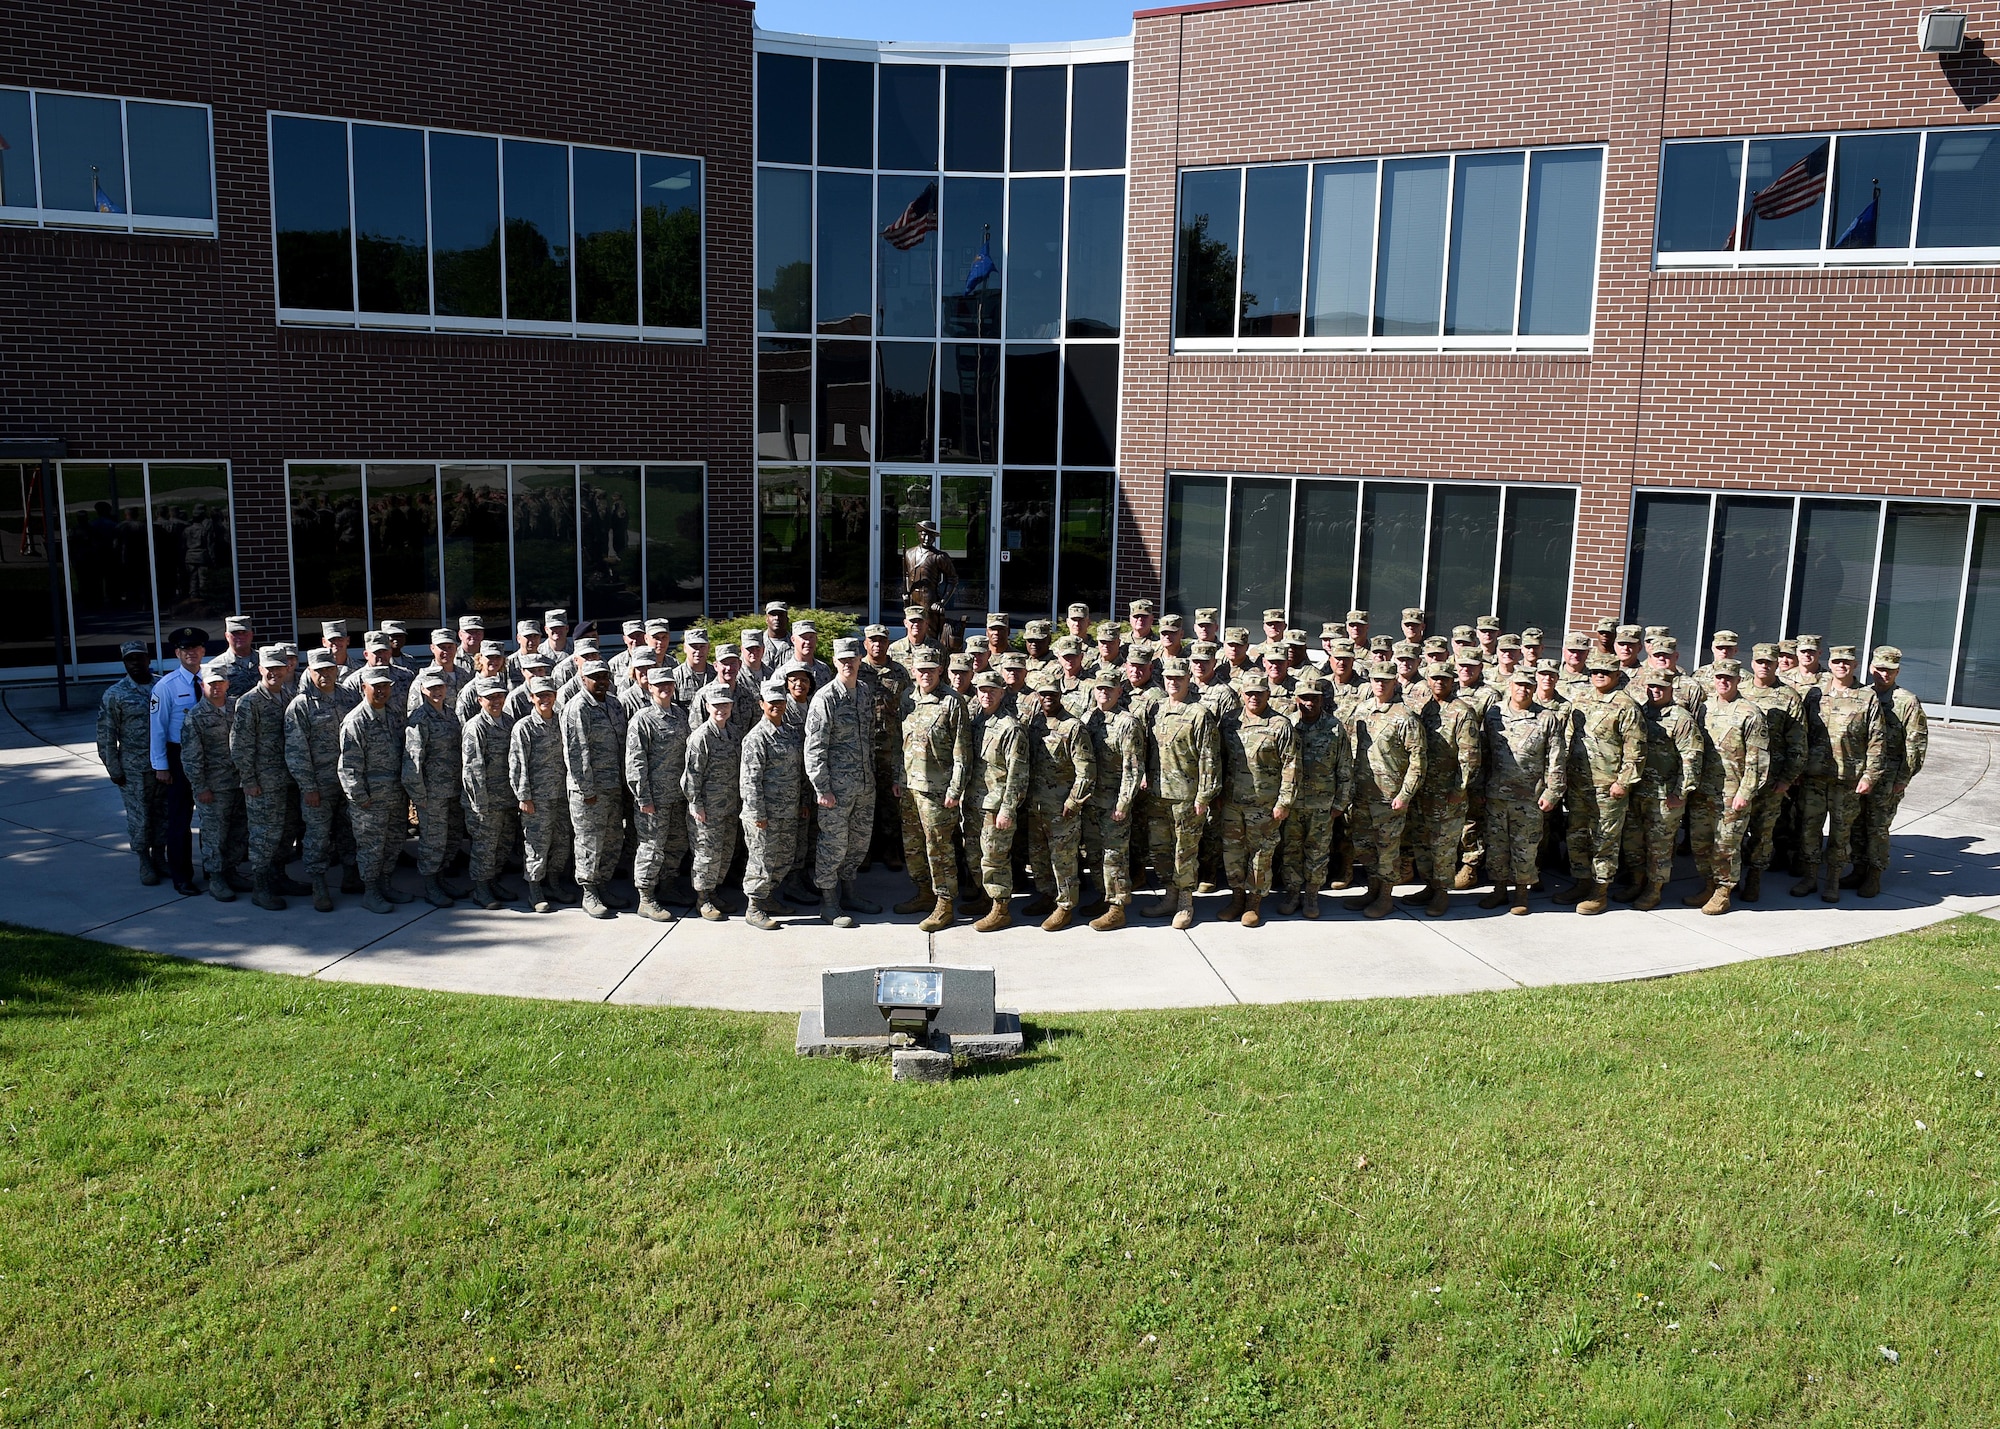 The Army and Air National Guard’s senior enlisted leaders gather outside Patriot Hall at the I.G. Brown Training and Education Center, May 3, 2017, in east Tennessee, for a photograph as a Joint Enlisted Advisory Council. The JEAC met at TEC this week to work together, as well as within their component groups, and coordinate efforts for enlisted Guard members. (U.S. Air National Guard photo by Master Sgt. Mike R. Smith)